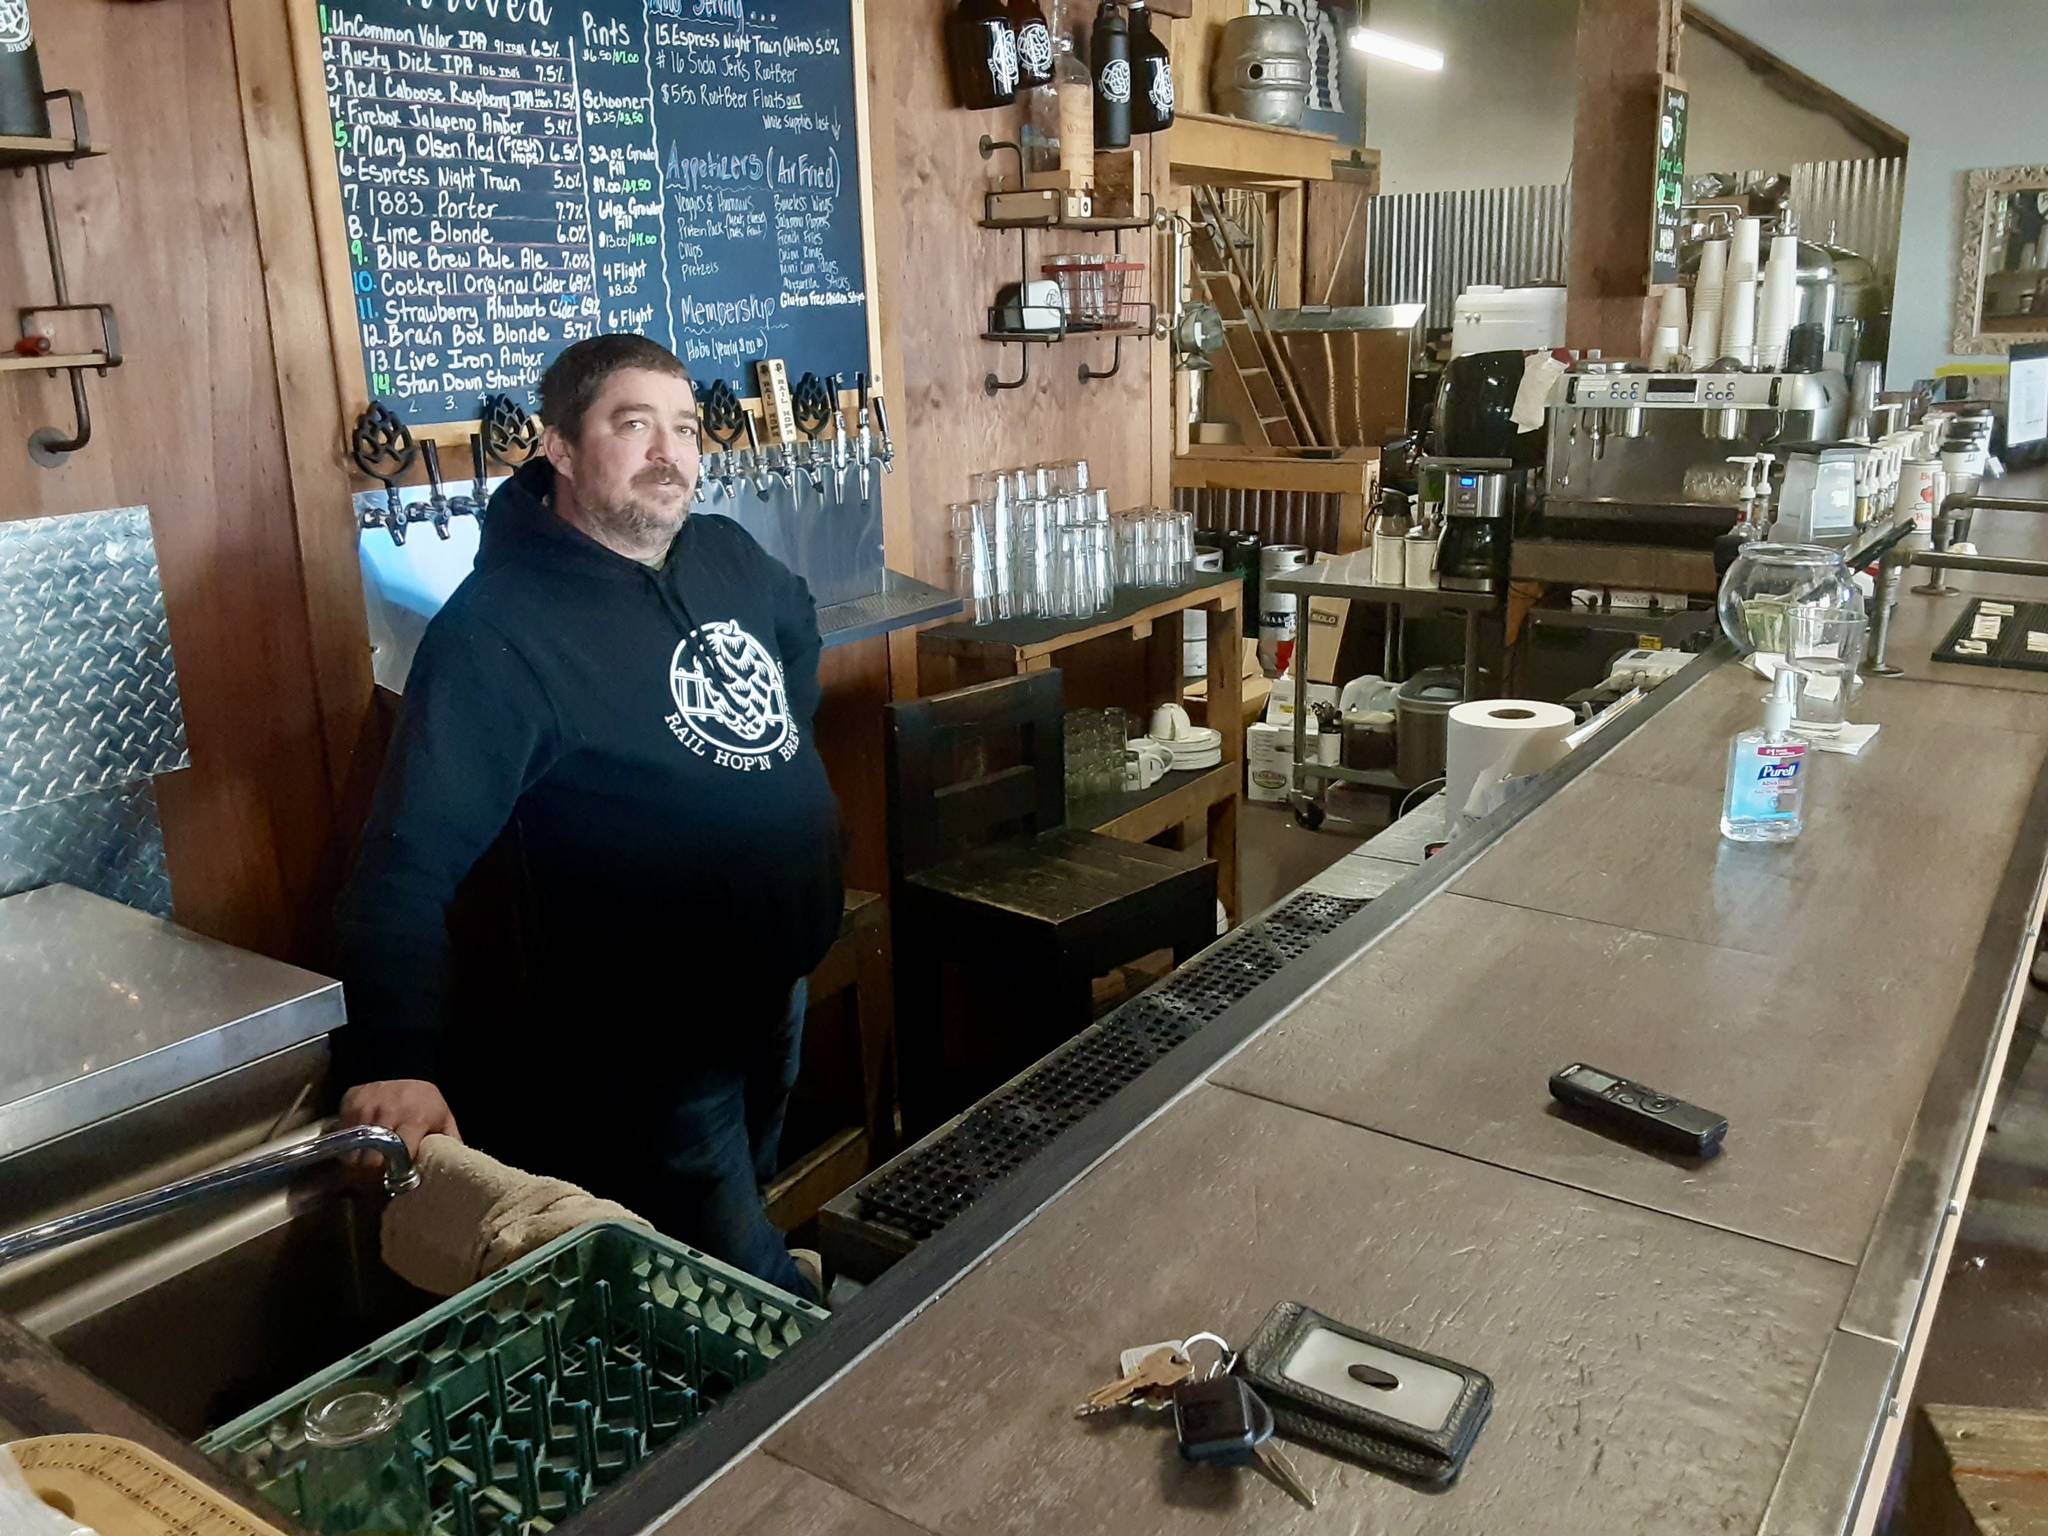 William ’Billy Jack’ Newman tends to a quiet bar at the Rail Hop’n Brewing Co. on Auburn’s West Main Street. The coronavirus pandemic has hurt many downtown small businesses. ROBERT WHALE, Auburn Reporter